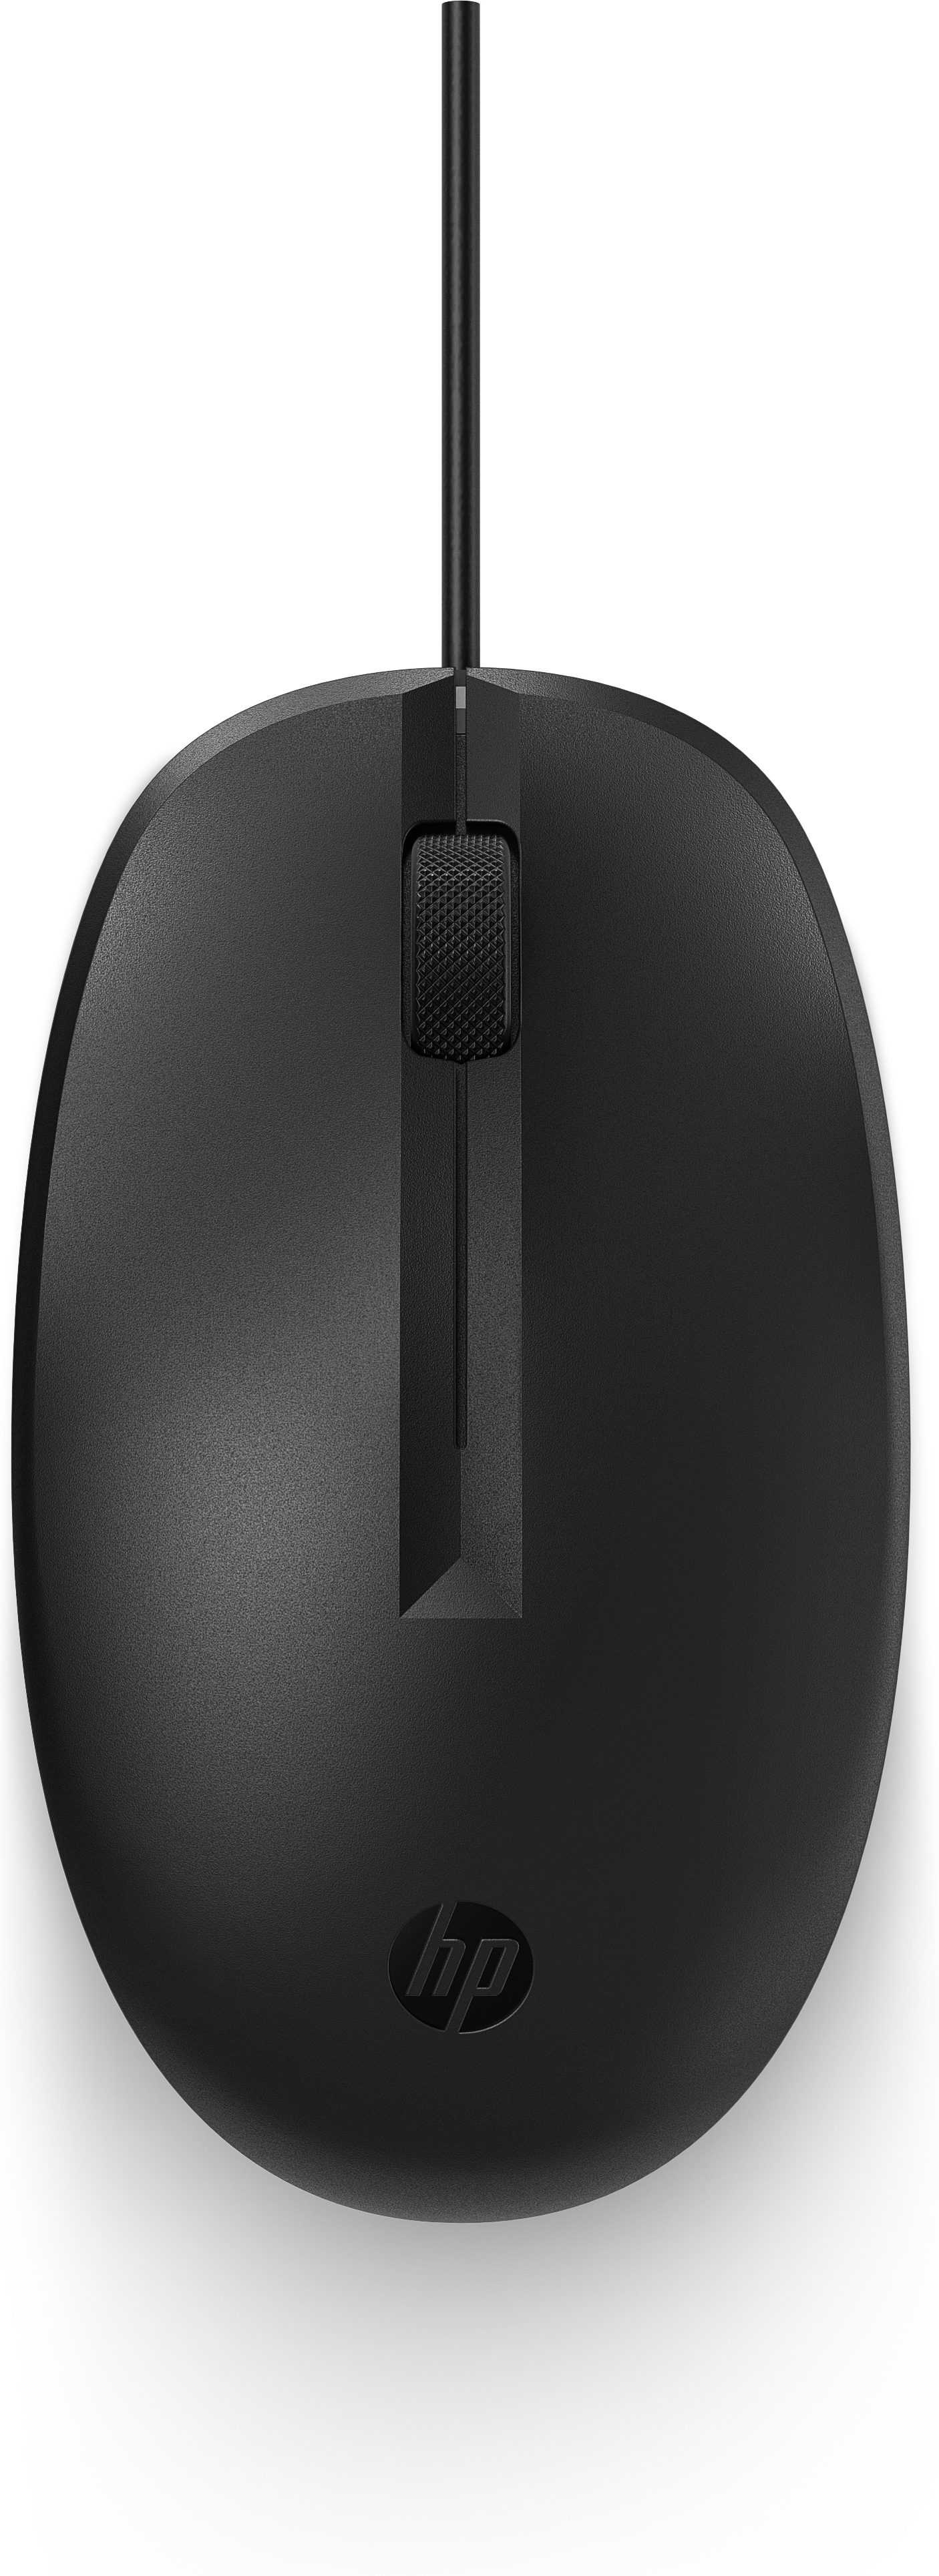  128 LSR Wired Mouse